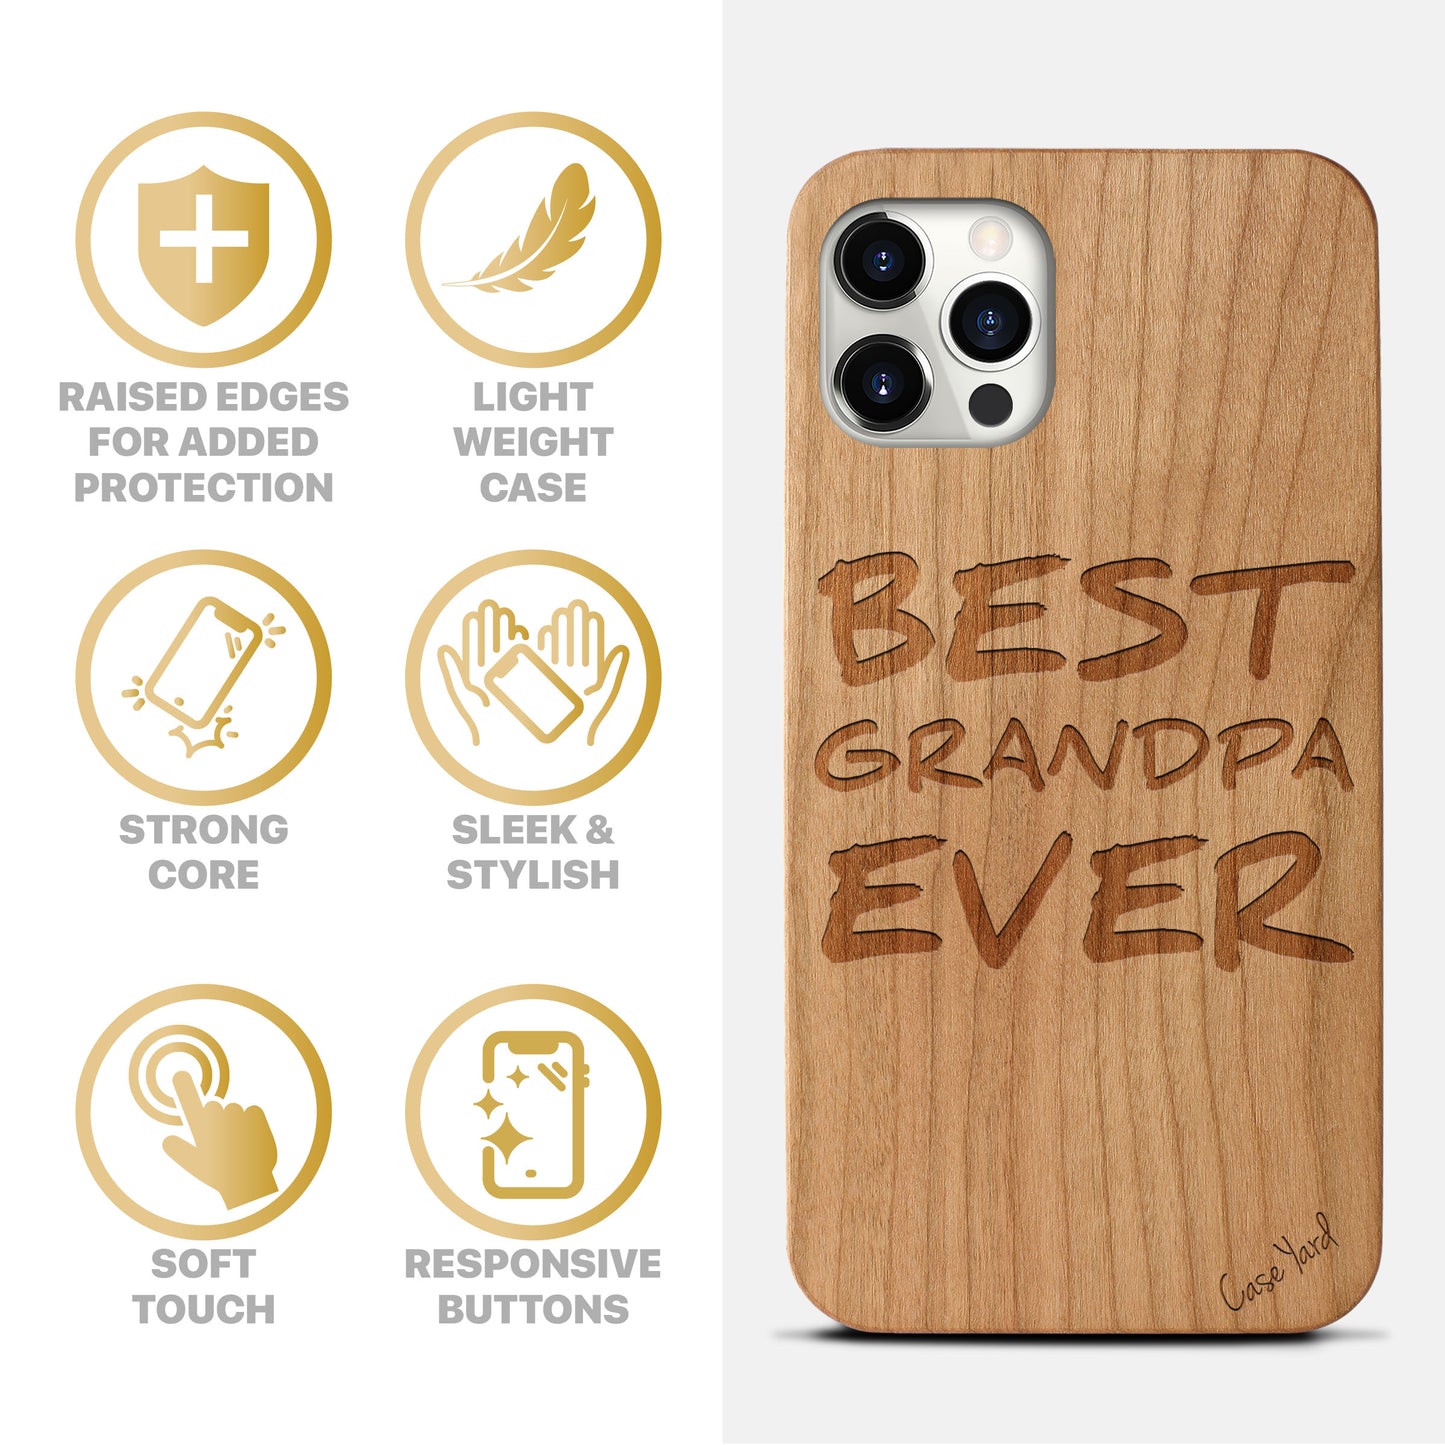 Wooden Cell Phone Case Cover, Laser Engraved case for iPhone & Samsung phone Best Grandpa Ever Design